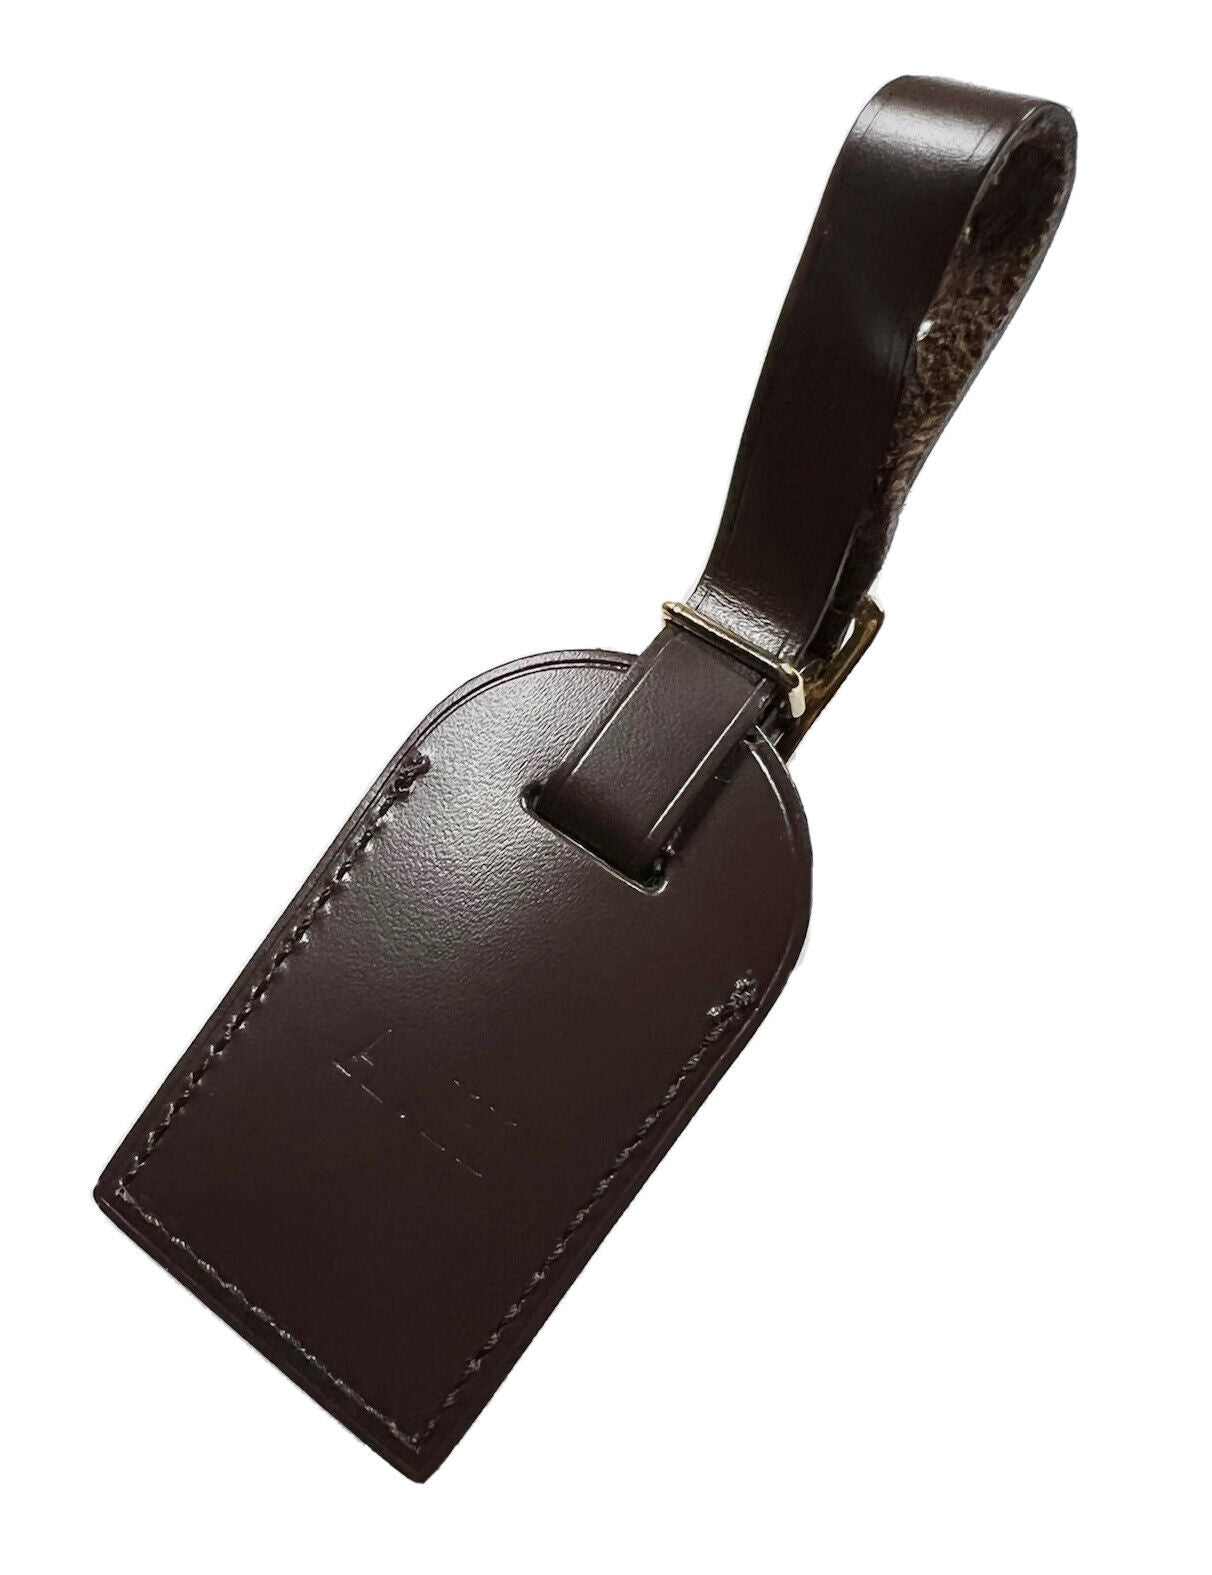 Louis Vuitton Luggage Tag Small w/ AH Stamp Damier Ebene Leather